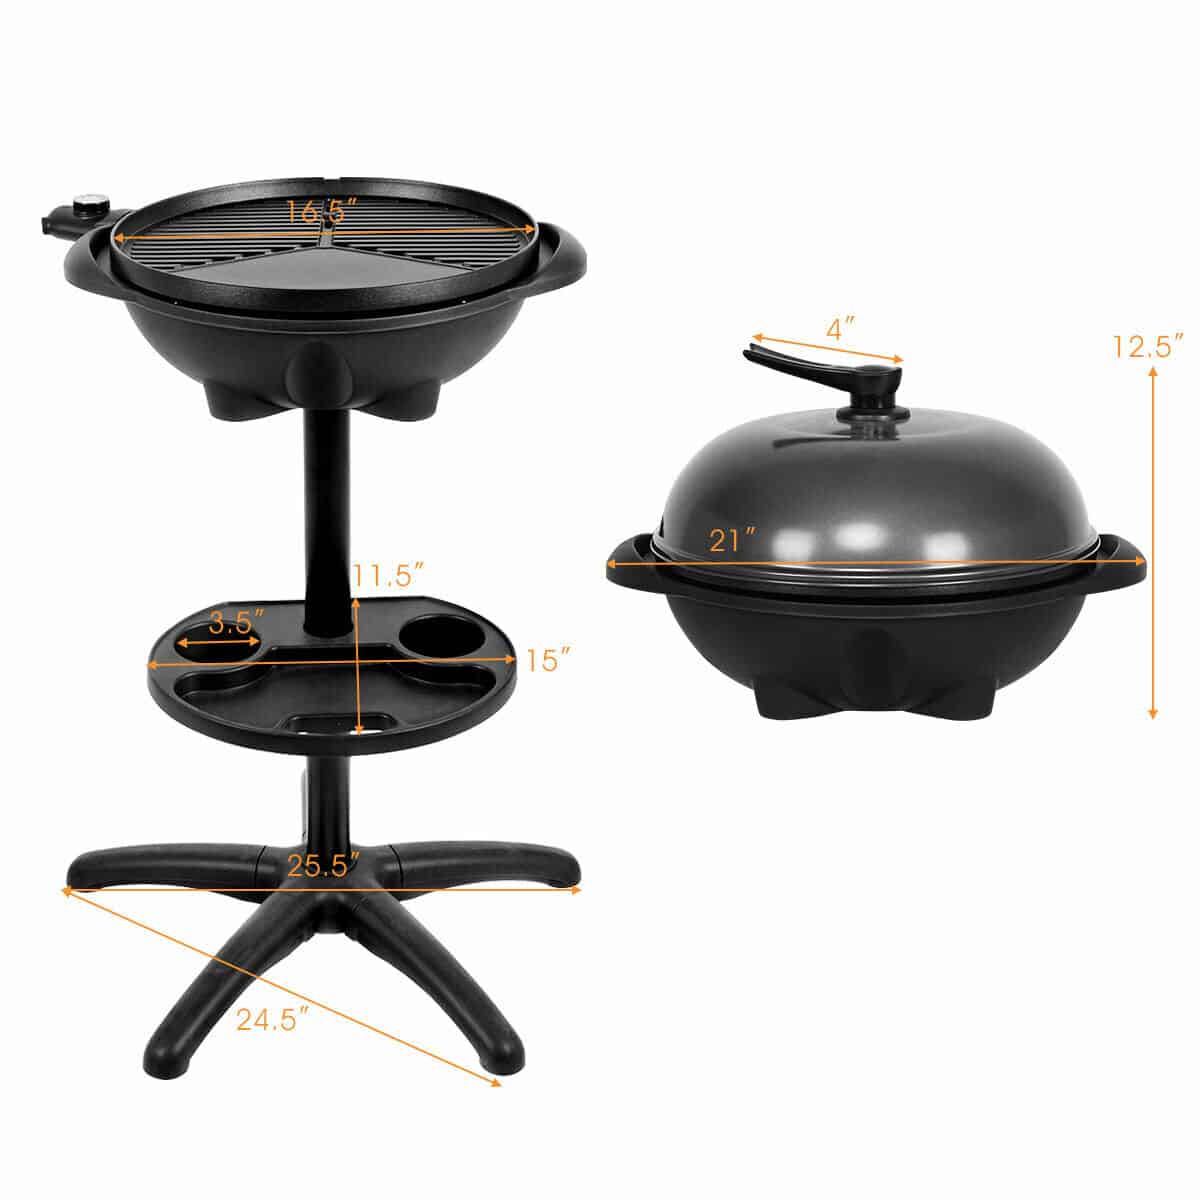 COSTWAY 1350W Electric Grill Review